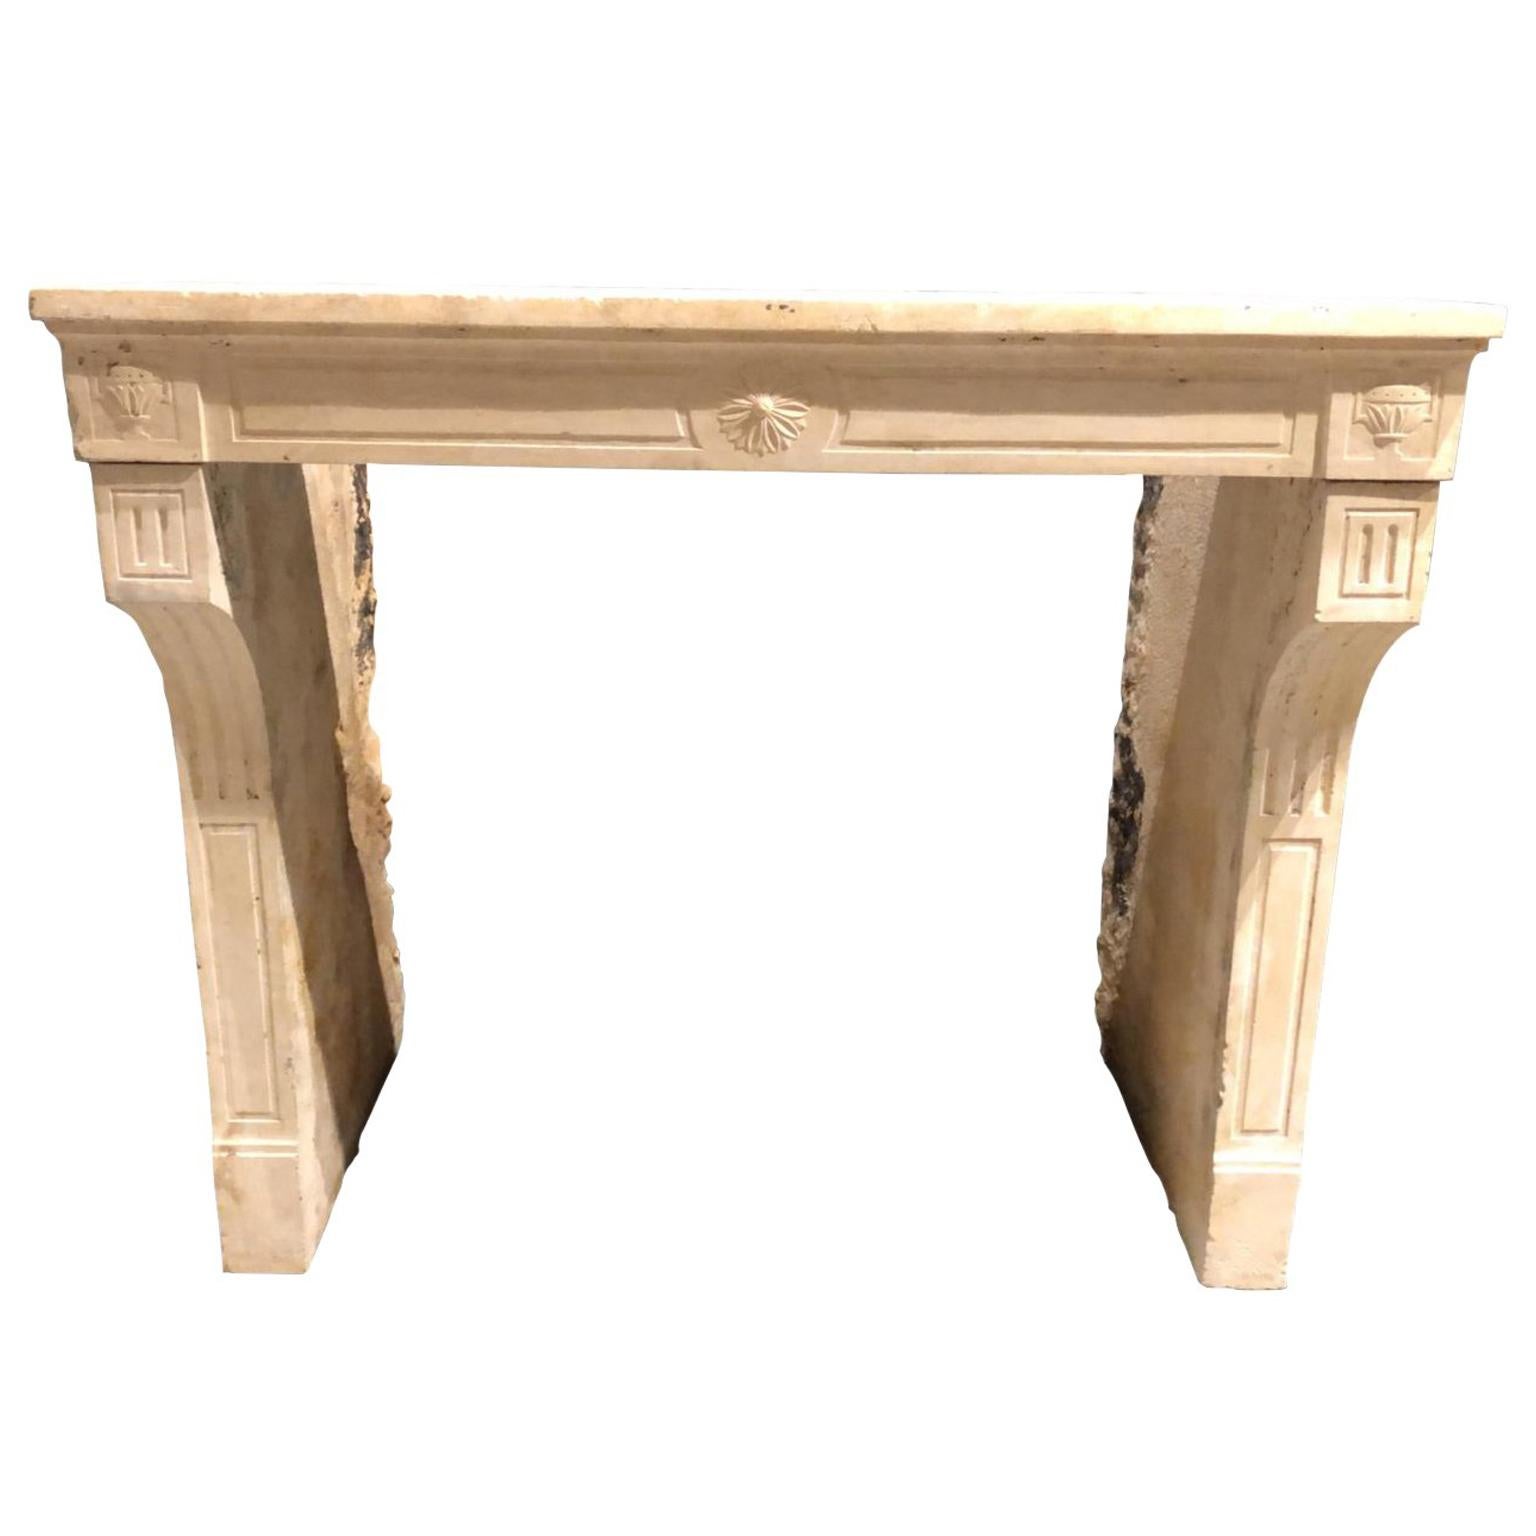 Decorative Fireplace Mantel in the Style of Louis XIV For Sale